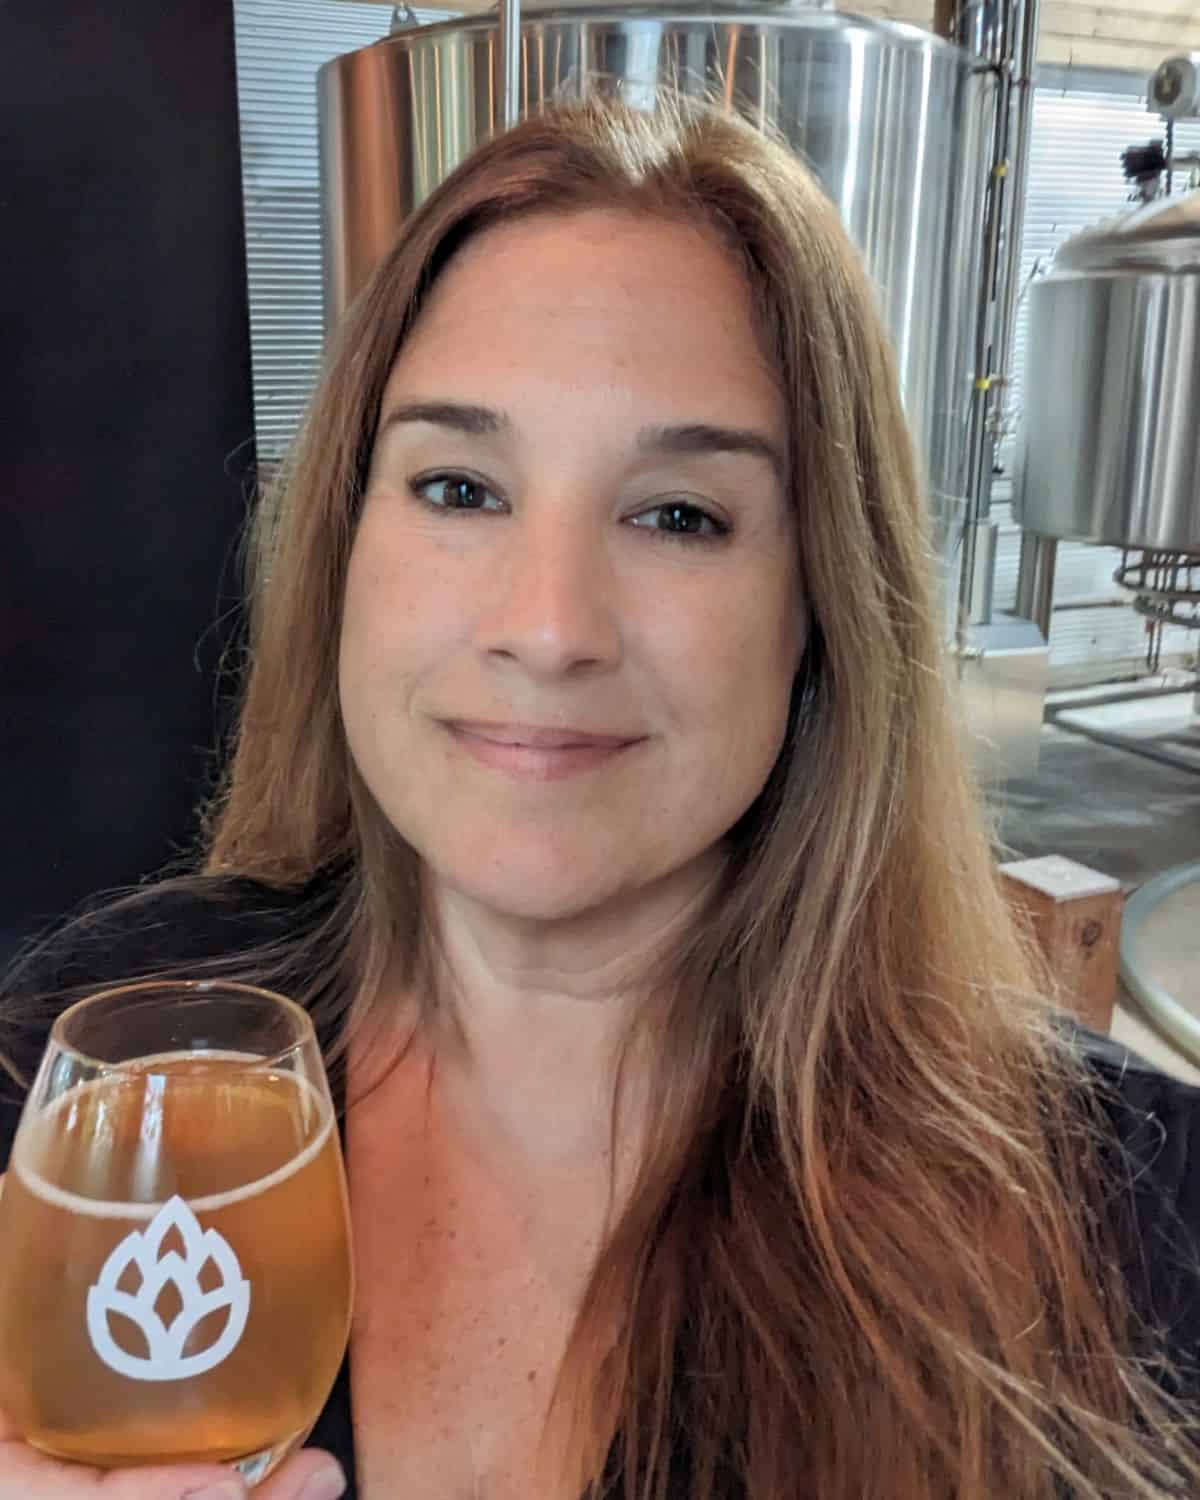 Jen smiling with a beer